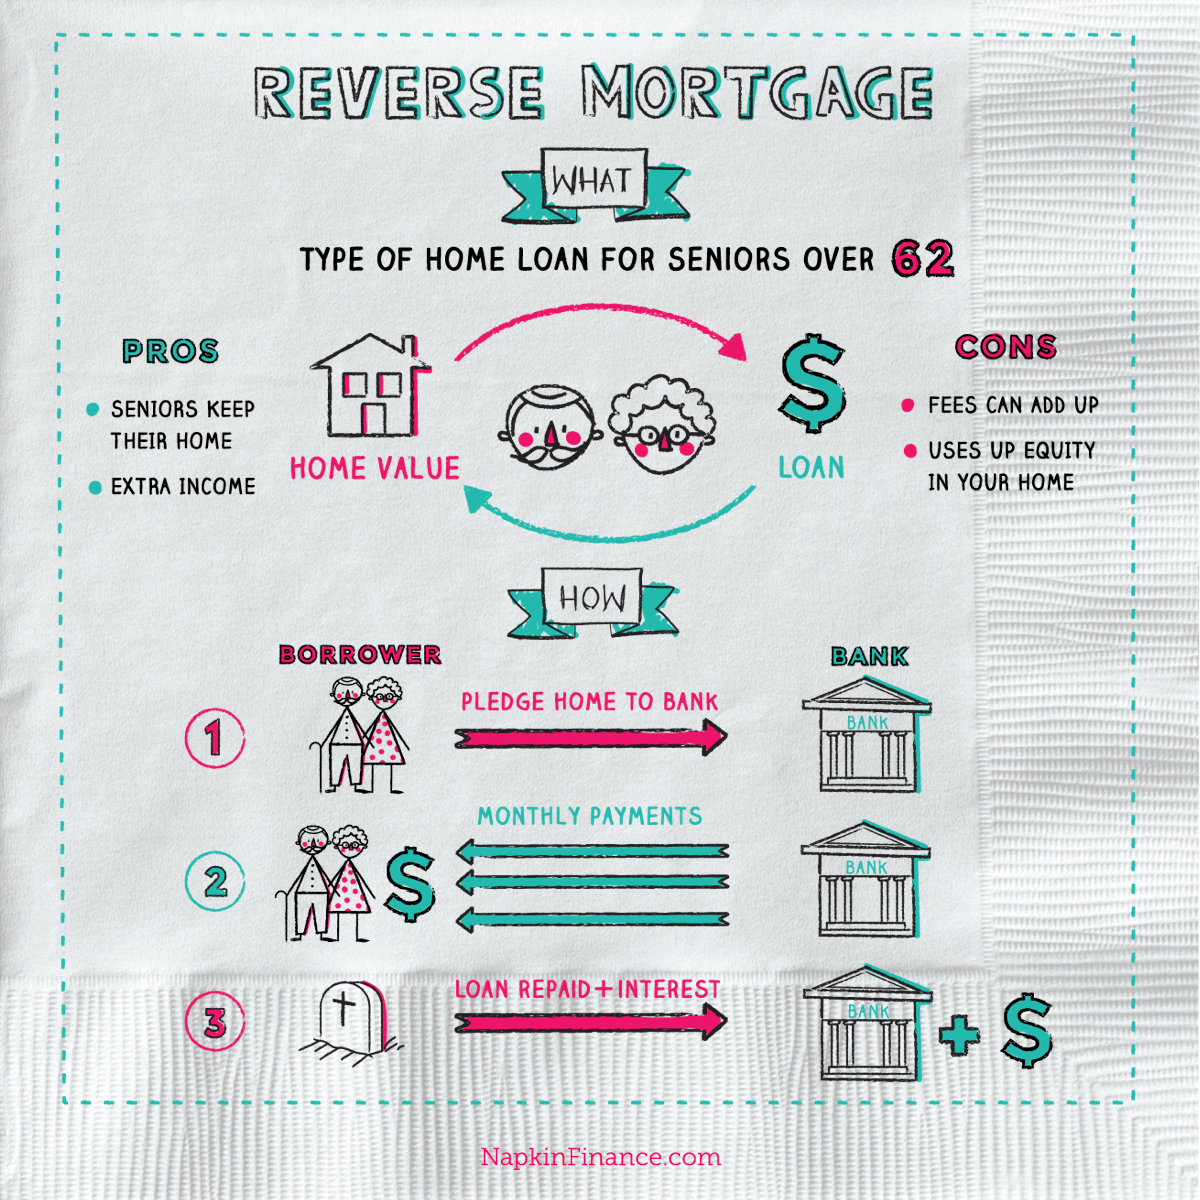 What is Reverse Mortgage Loan? Learn Reverse Mortgage Definition here!